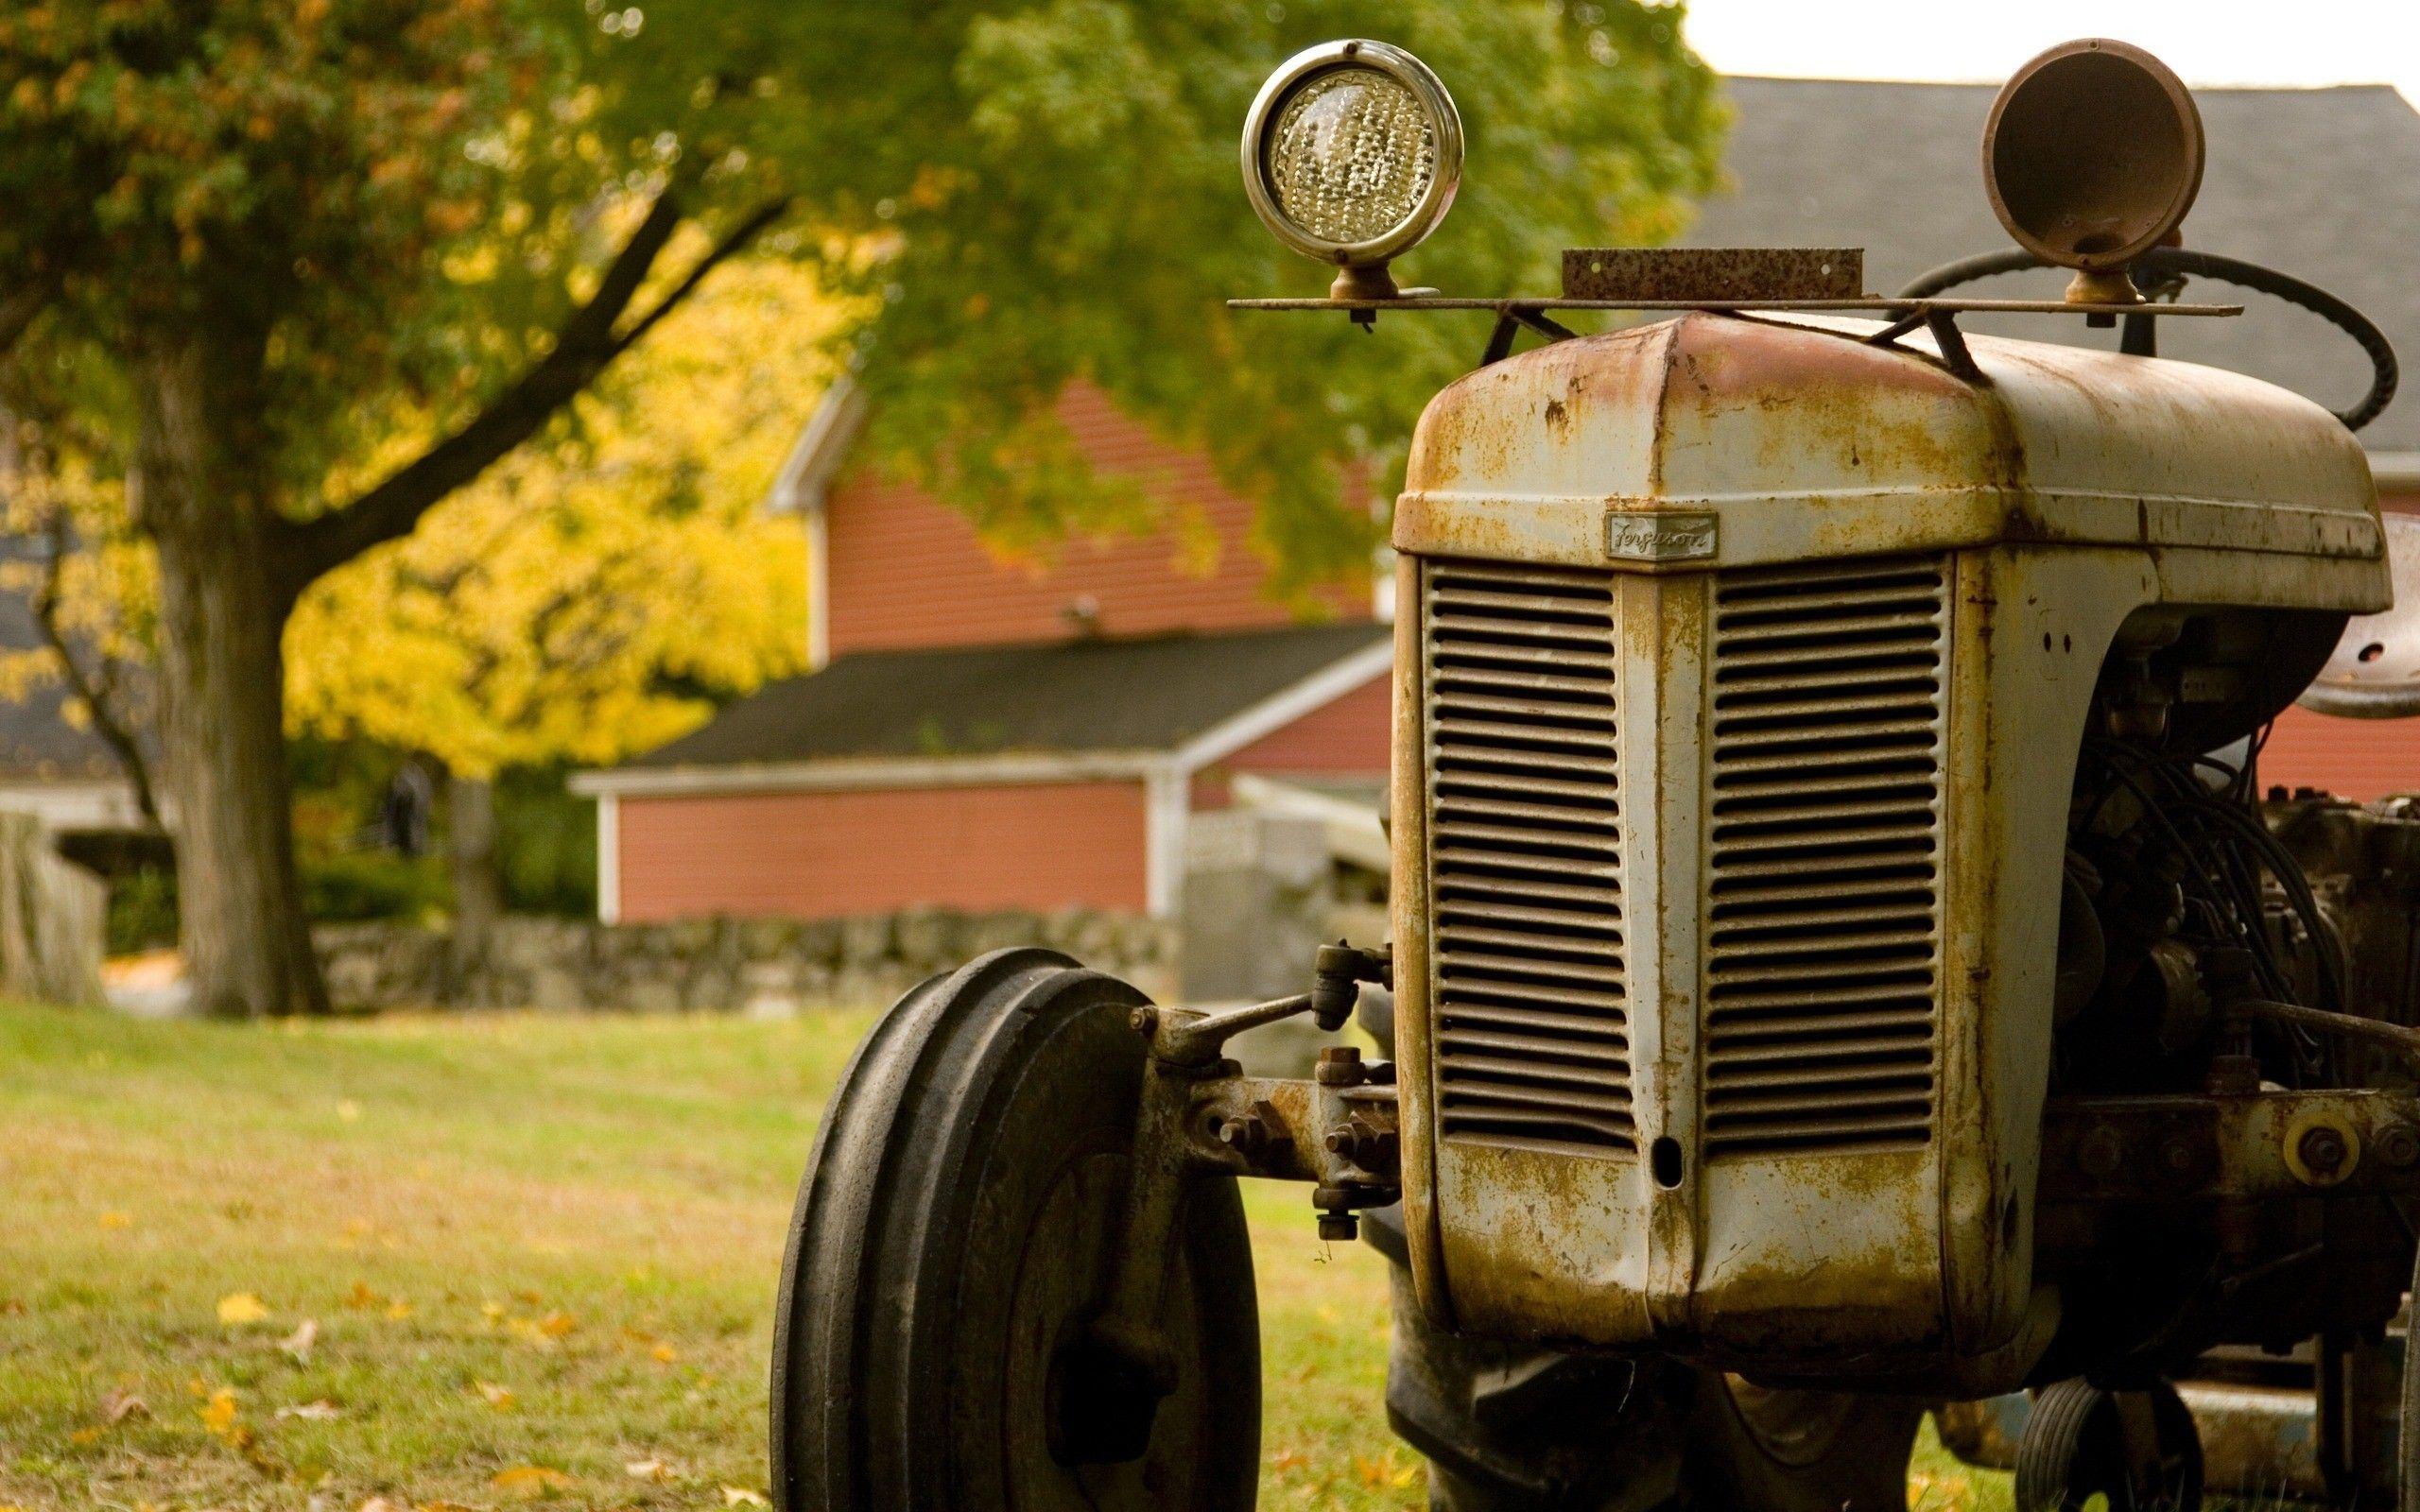 Tractor HD Wallpaper Image Picture Photo Download